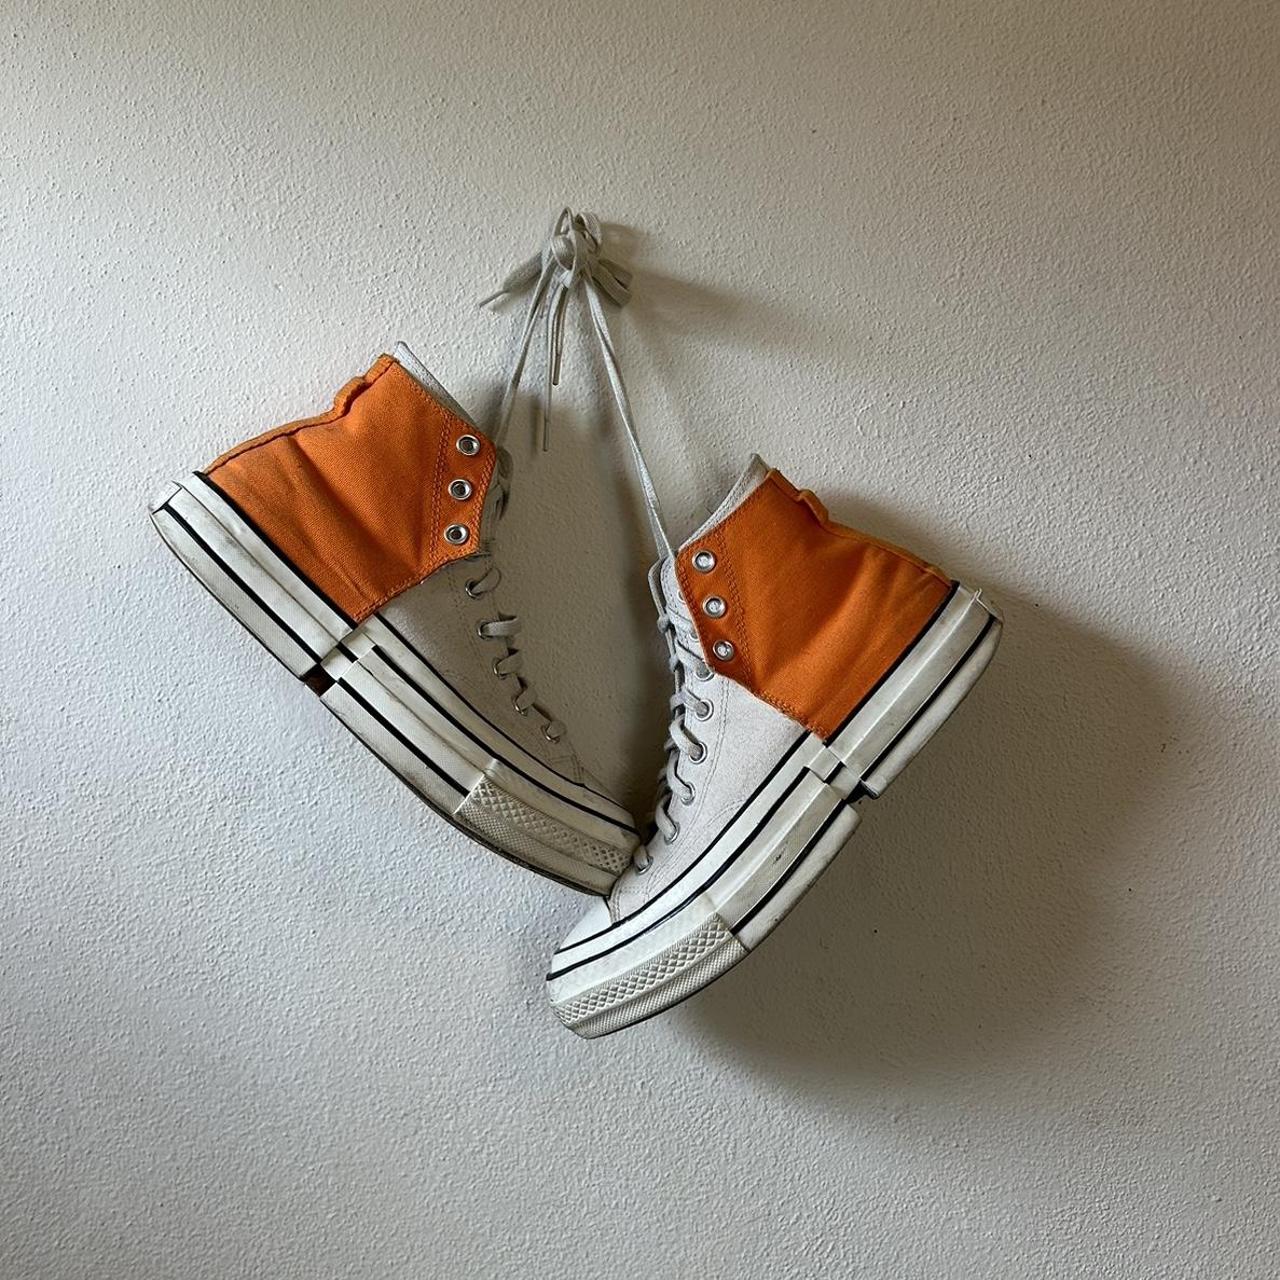 Feng Chen Wang Men's White and Orange Trainers